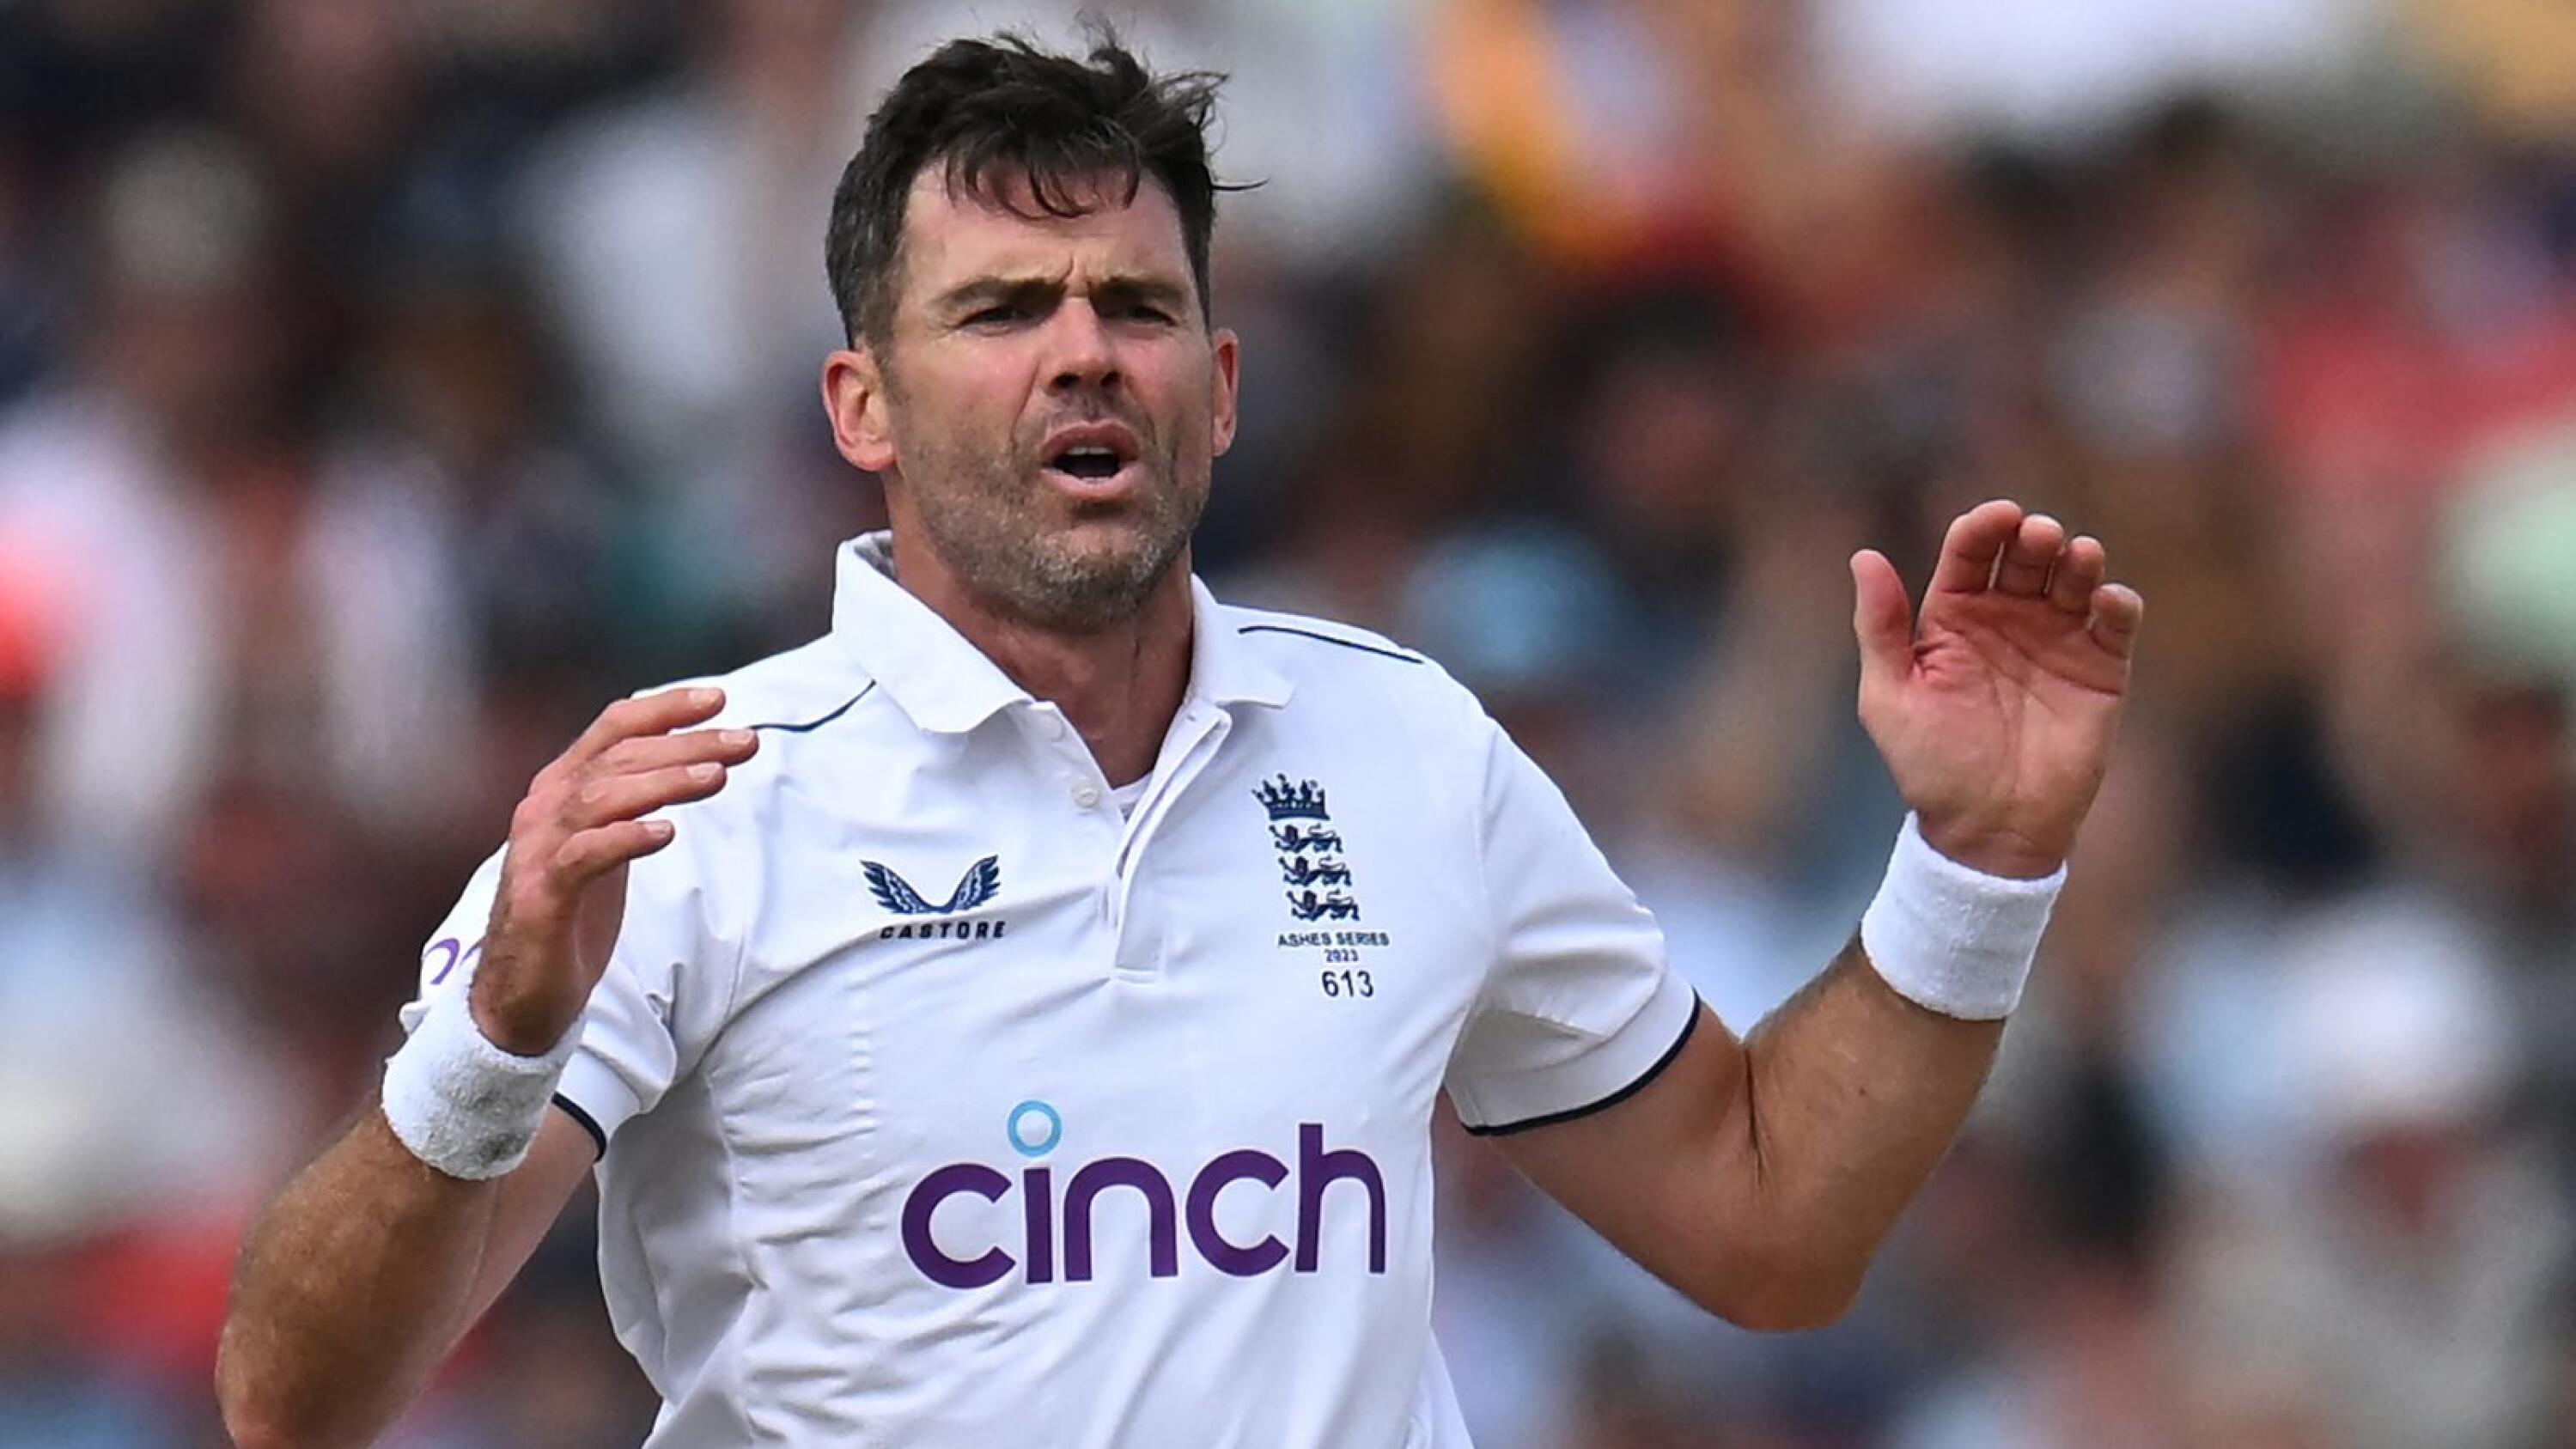 England's James Anderson reacts while bowling on day three of the fourth Ashes cricket Test match against Australia